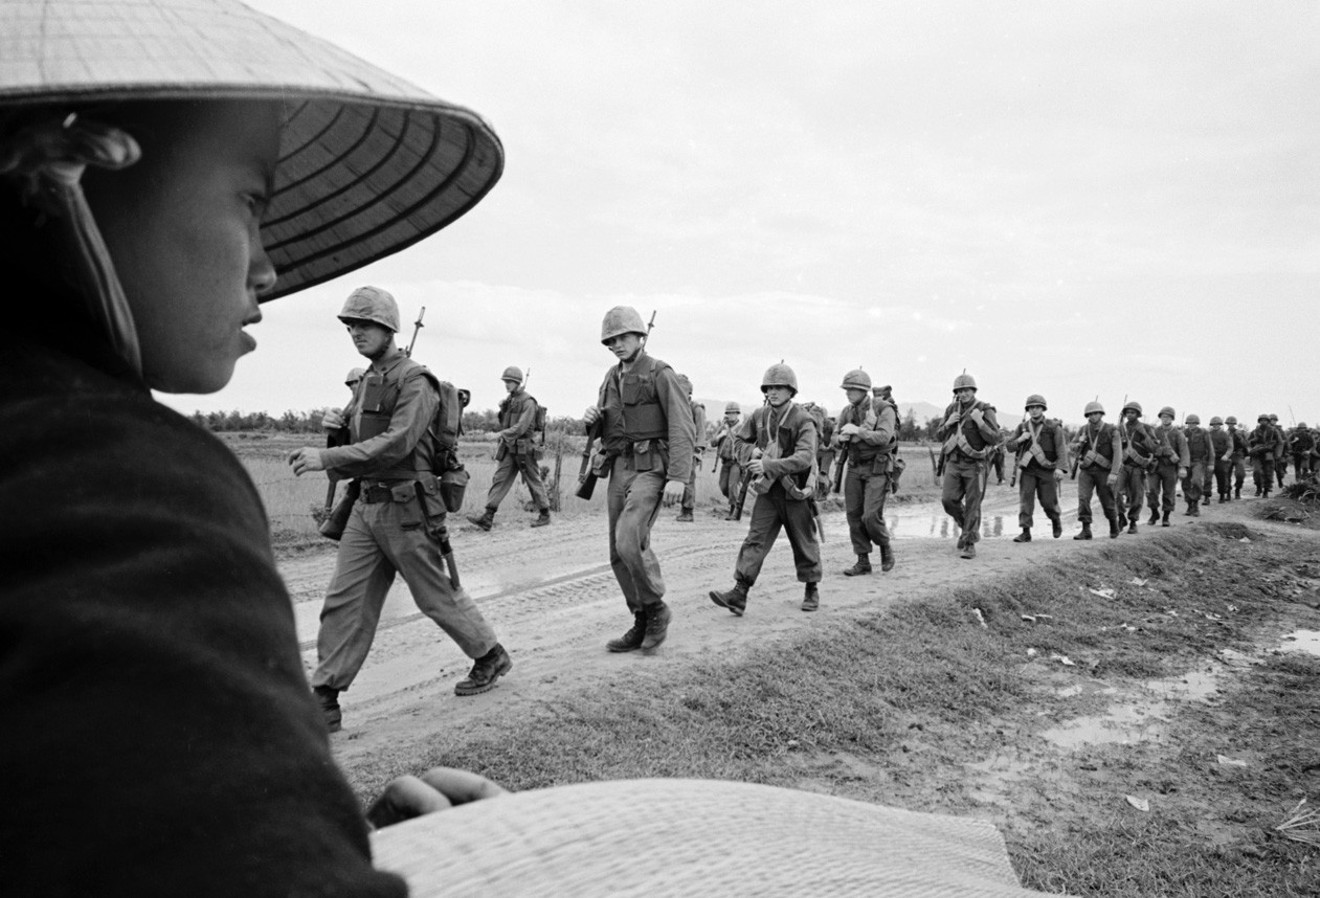 U.S. Marines, marching in Danang in March 1965, were among the subjects of The Vietnam War, an 18-hour, ten-part documentary by Ken Burns and Lynn Novick.